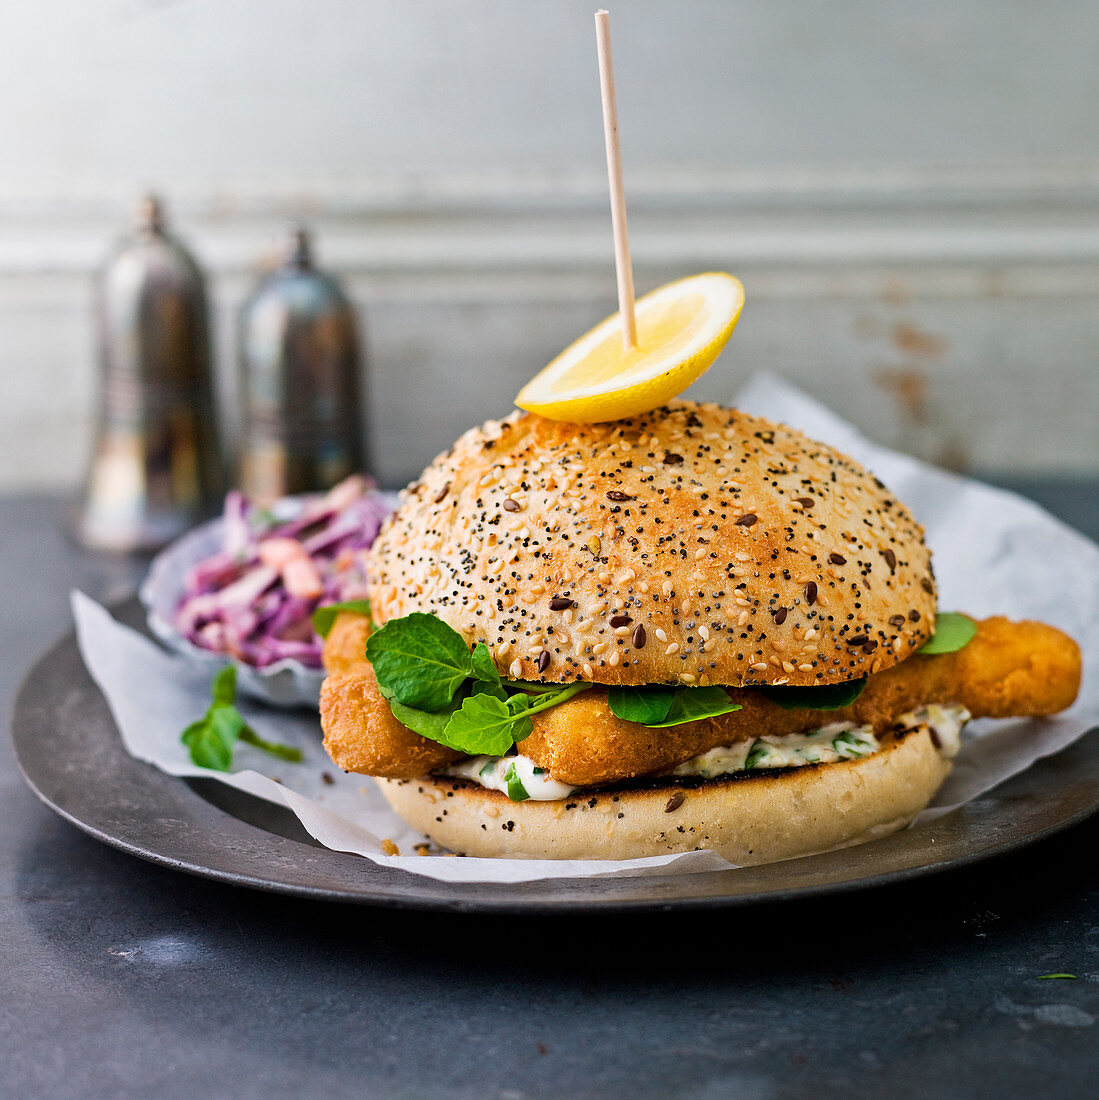 Fish fingers in a seeded roll, with lettuce, coleslaw, lemon wedge